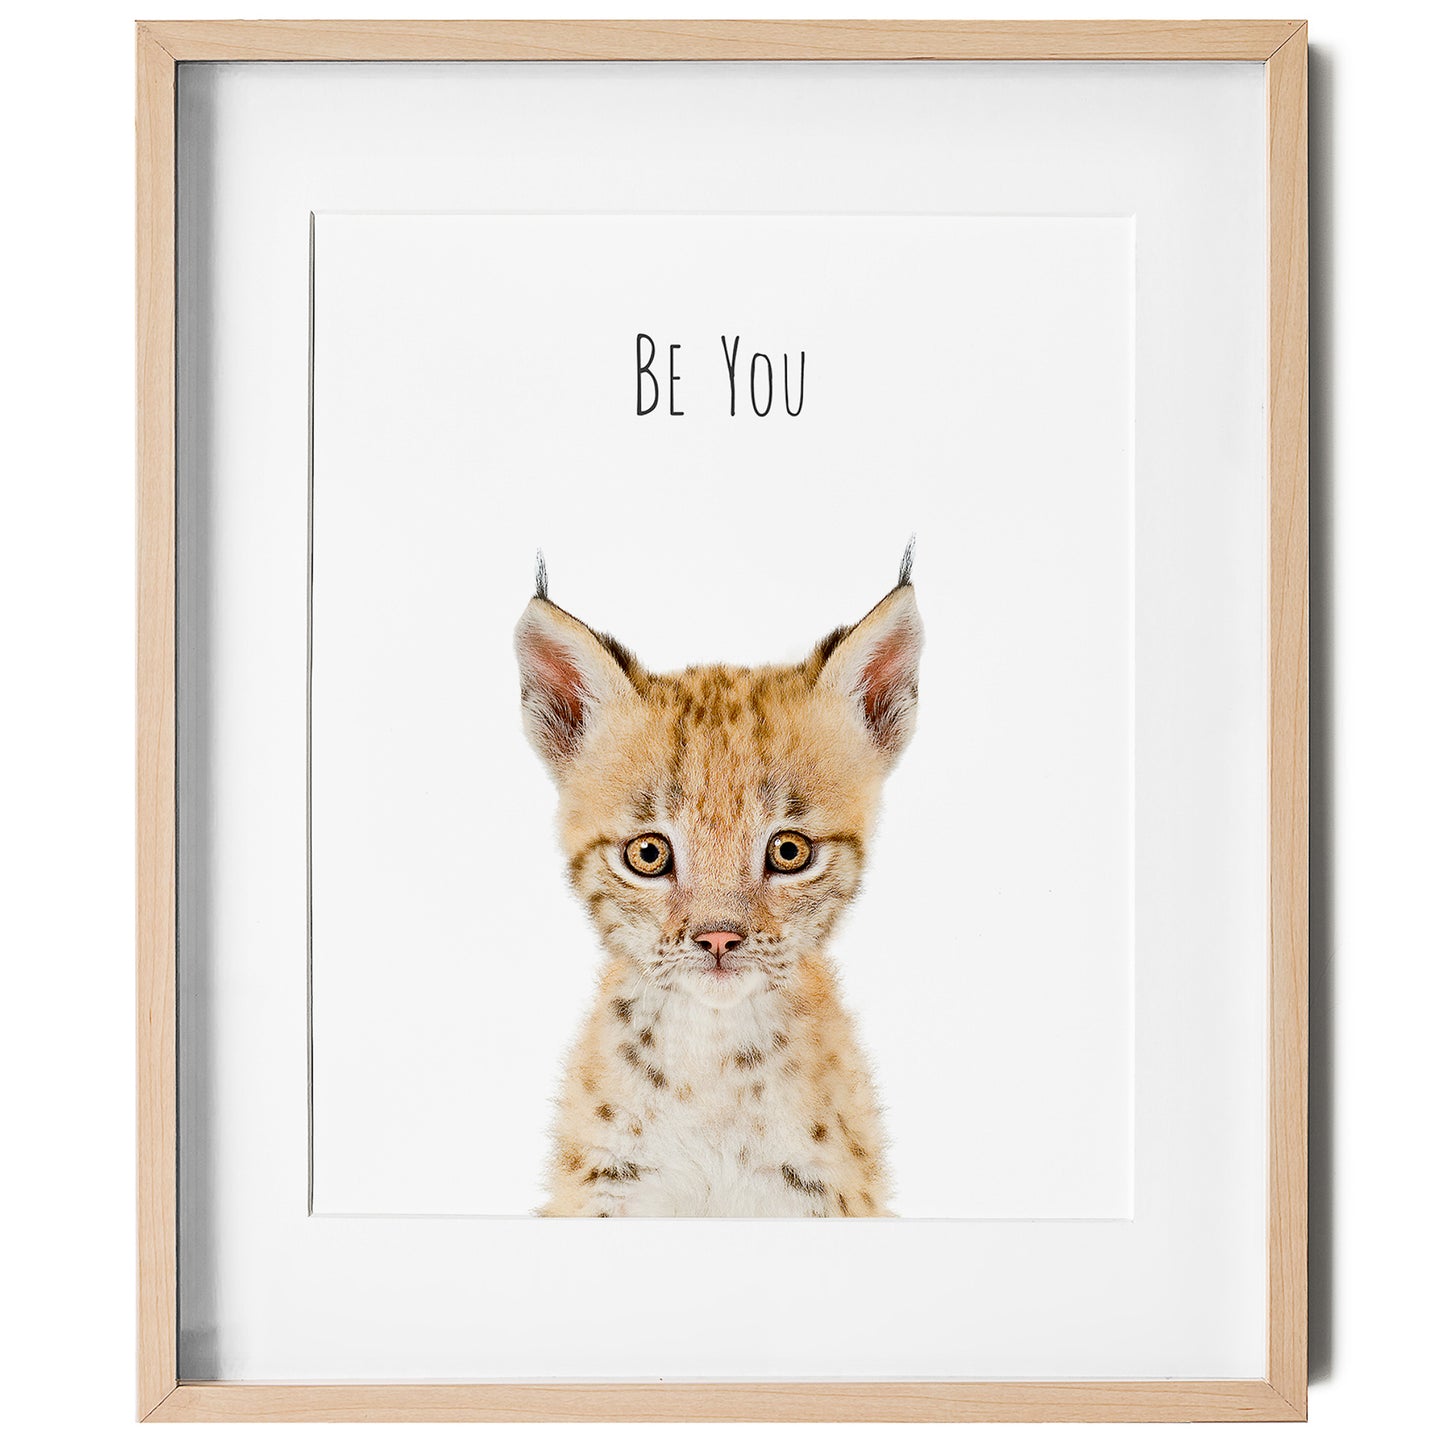 Bobcat Be You - Inspirational Wall Art for nursery or kids room